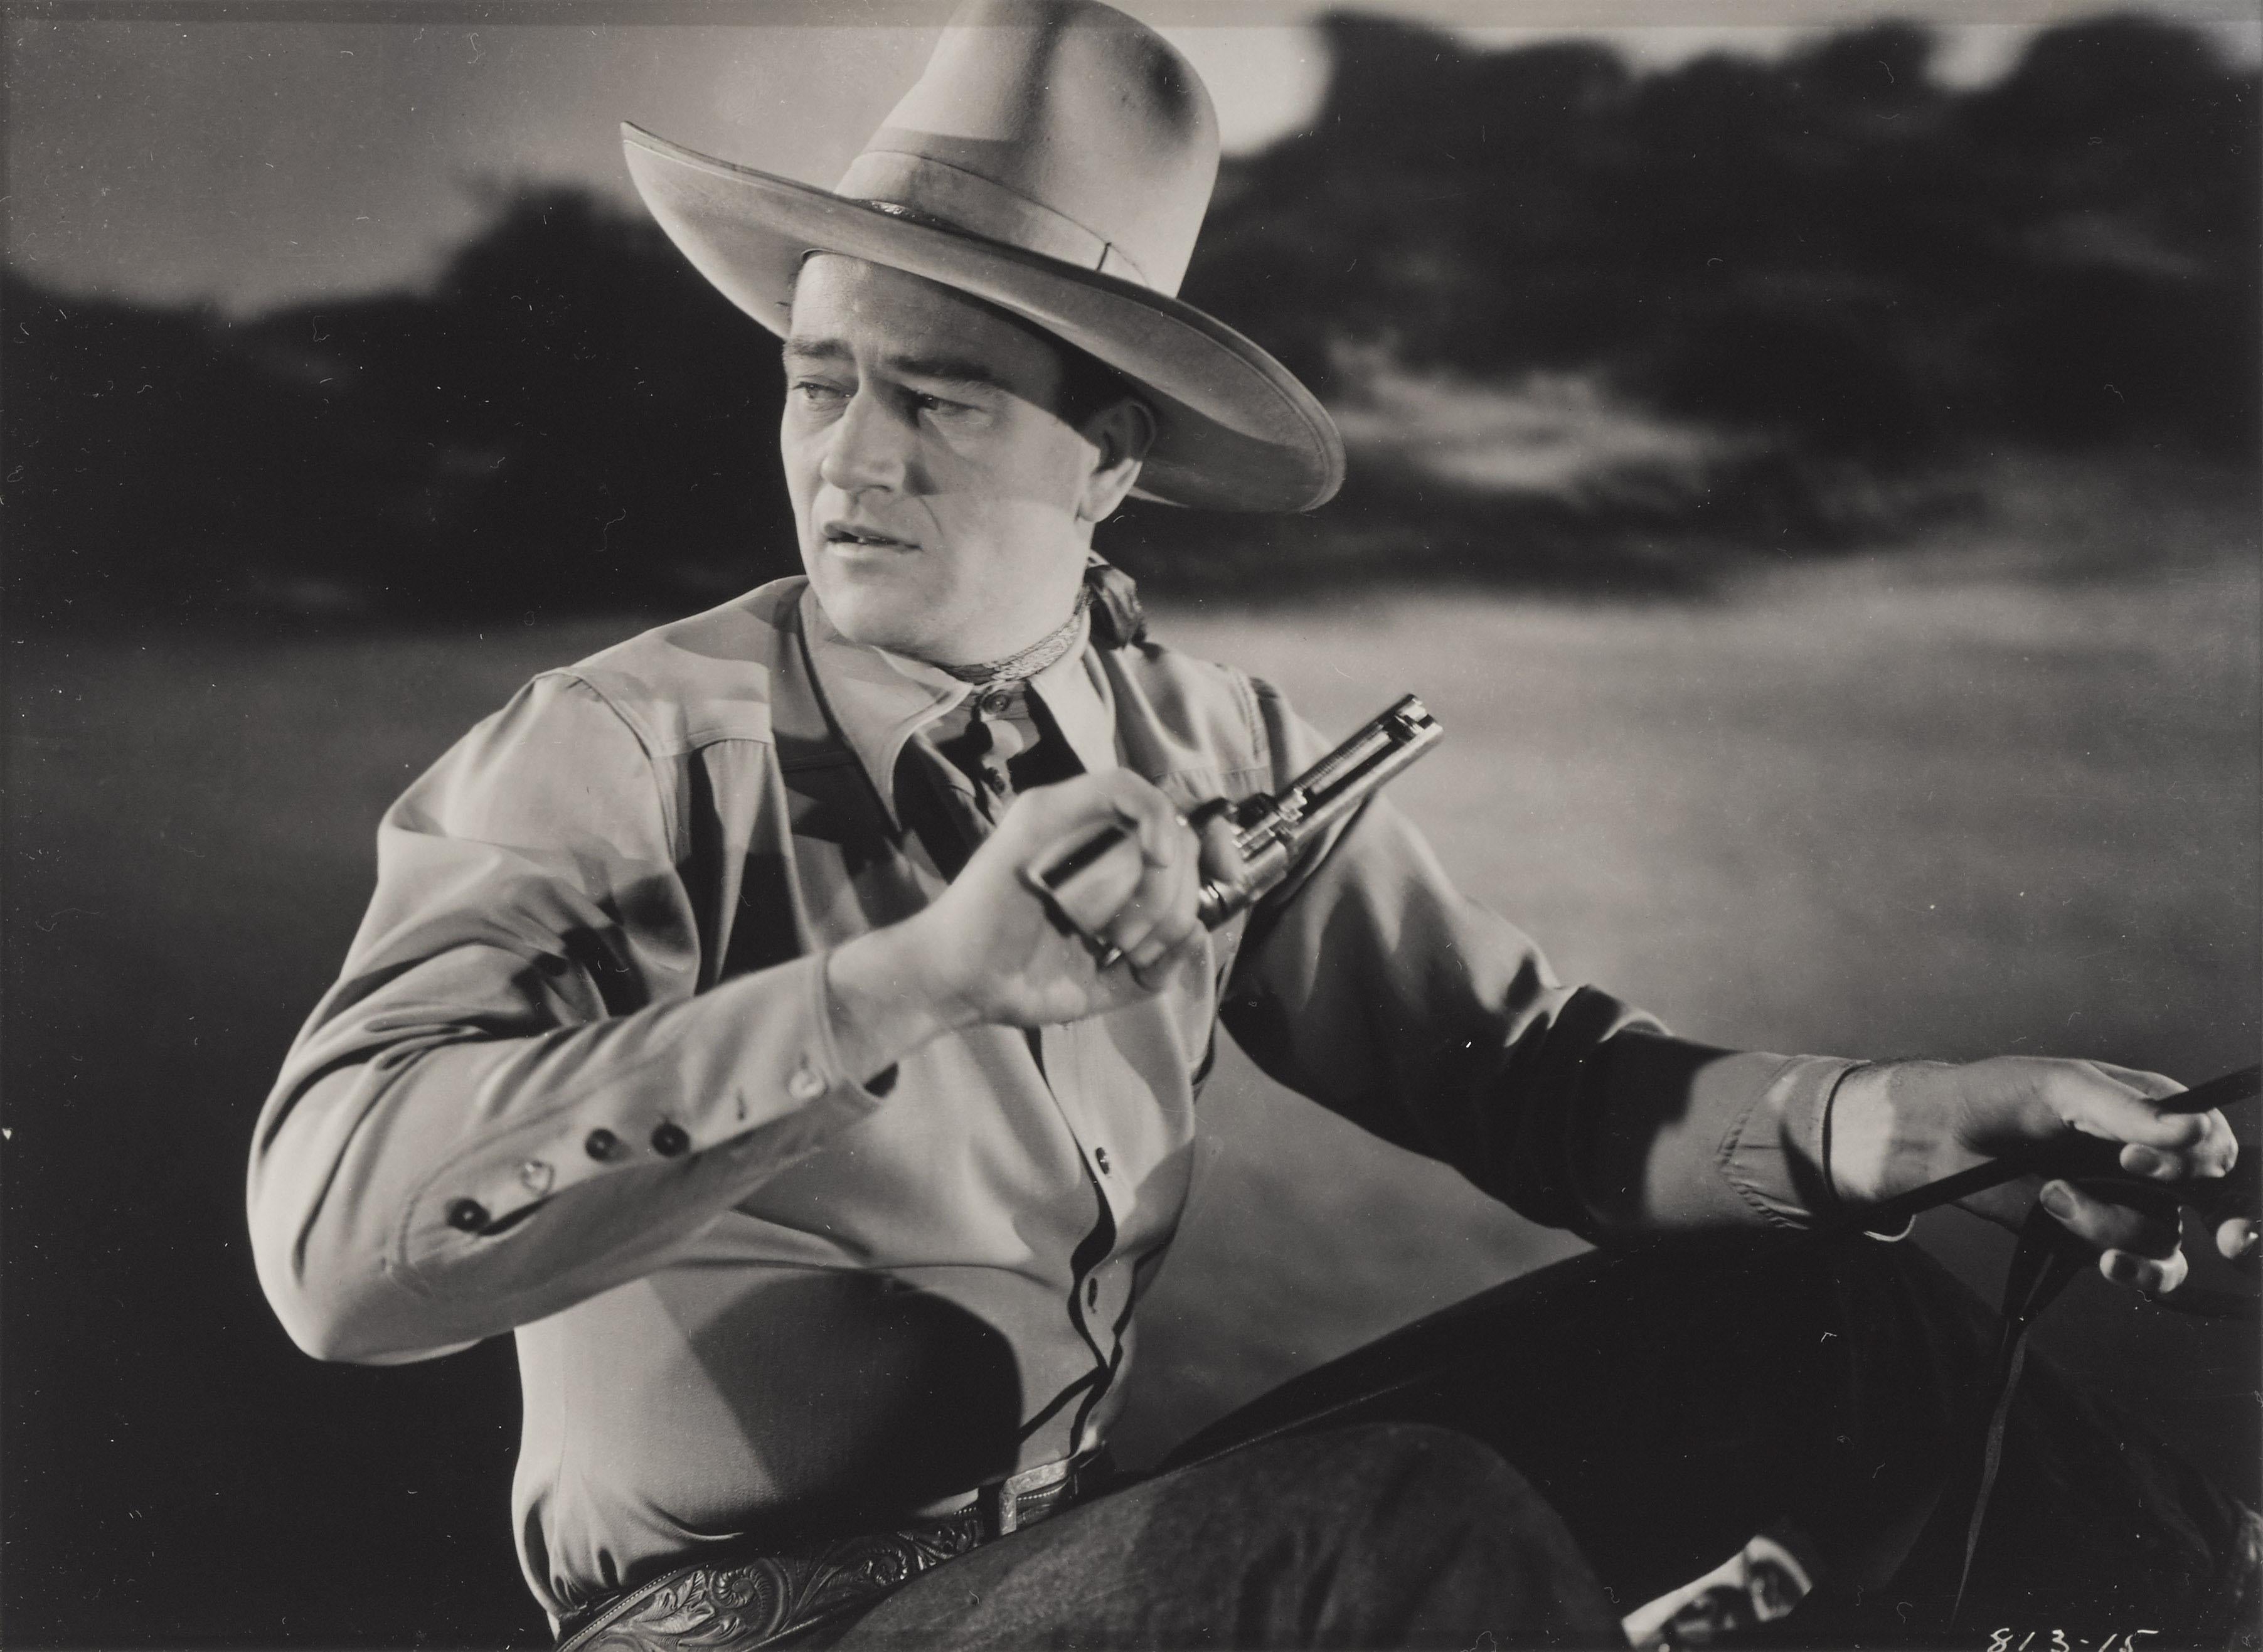 Original photographic production still for John Wayne's 1939 Western Three Texas Steers.
This film was directed by George Sherman.
This piece is conservation framed with UV plexiglass in an Obeche wood frame with acid free card mounts and UV